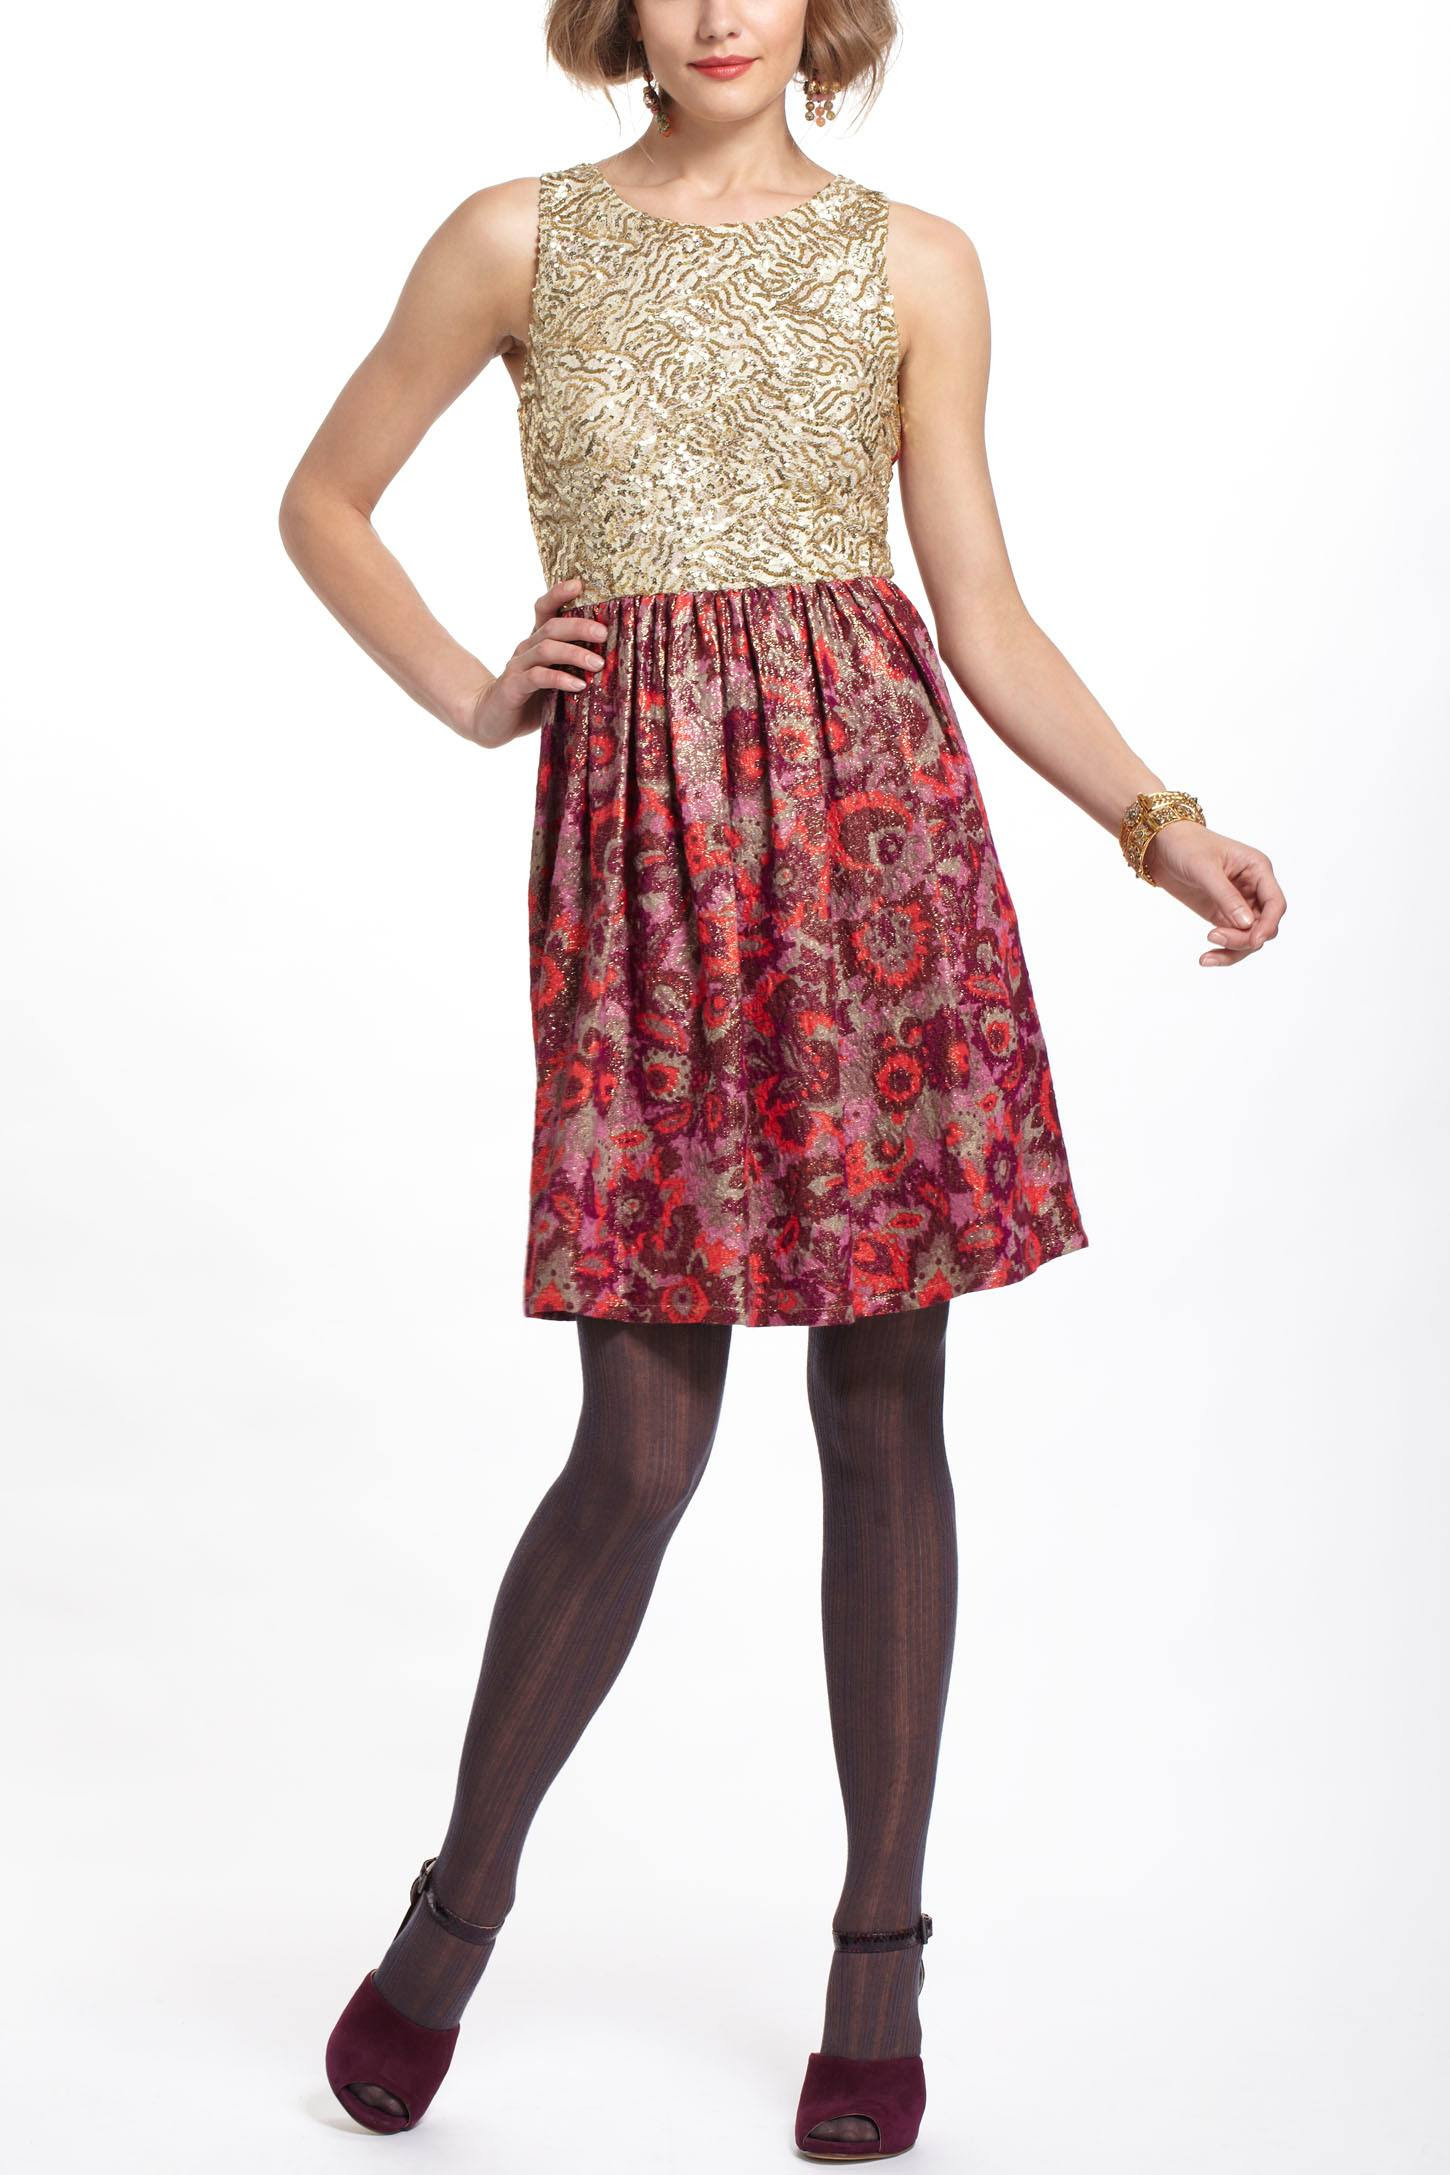 What I ♥ Today | Sequined Jacquard Dress & Caridad Ruffled Dress ...